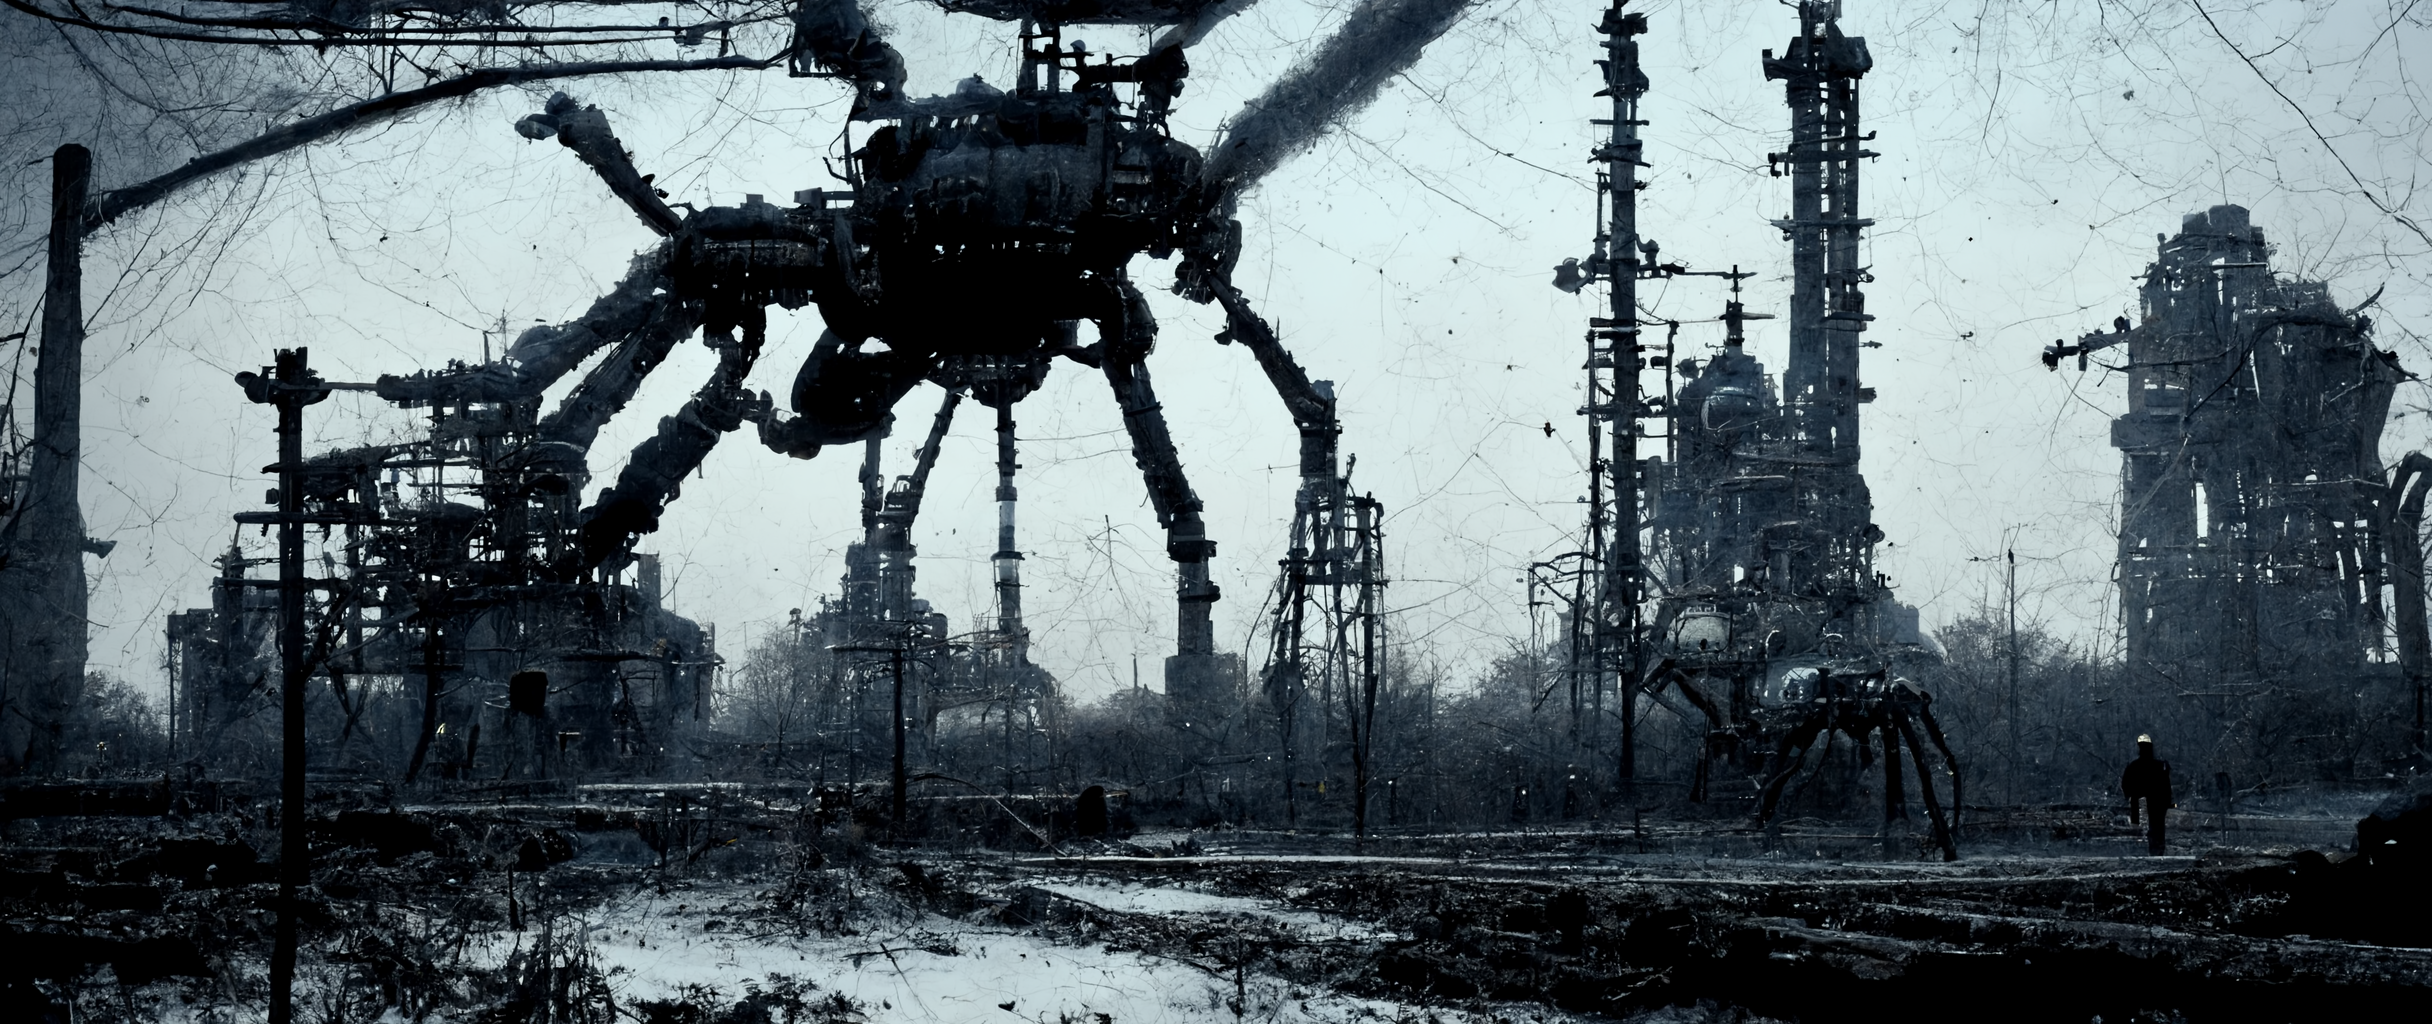 vibe_giant_robot_spiders_desolate_industrial_landscape_bombed_r_00bcd53c-c130-463f-a36a-596fcbe8e0a8